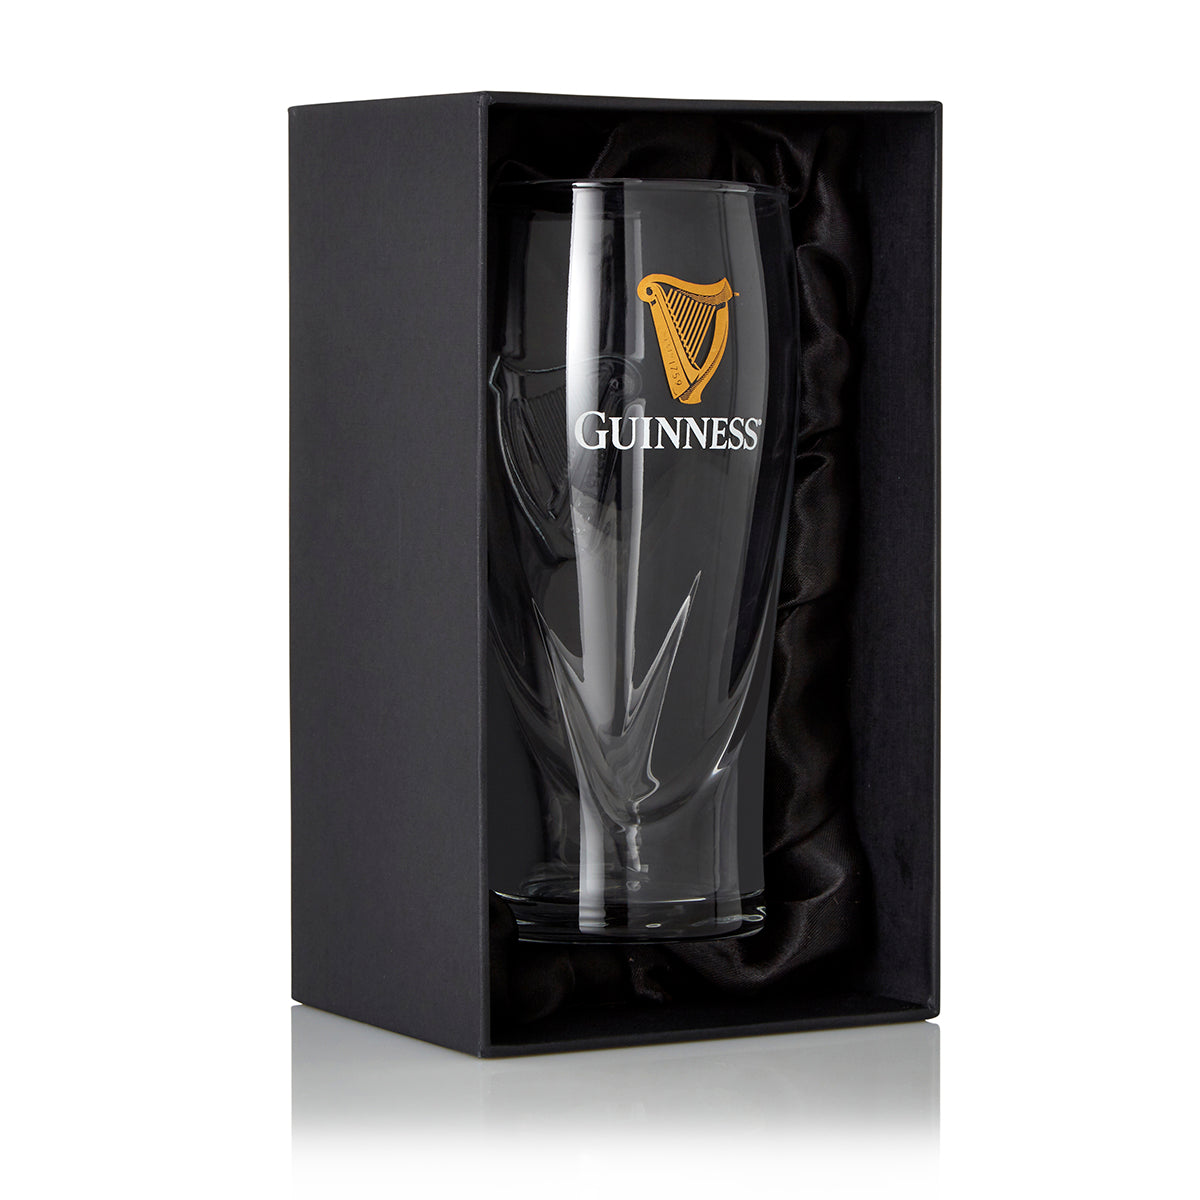 A Guinness Pint Glass Gift Boxed in a black box with the logo.